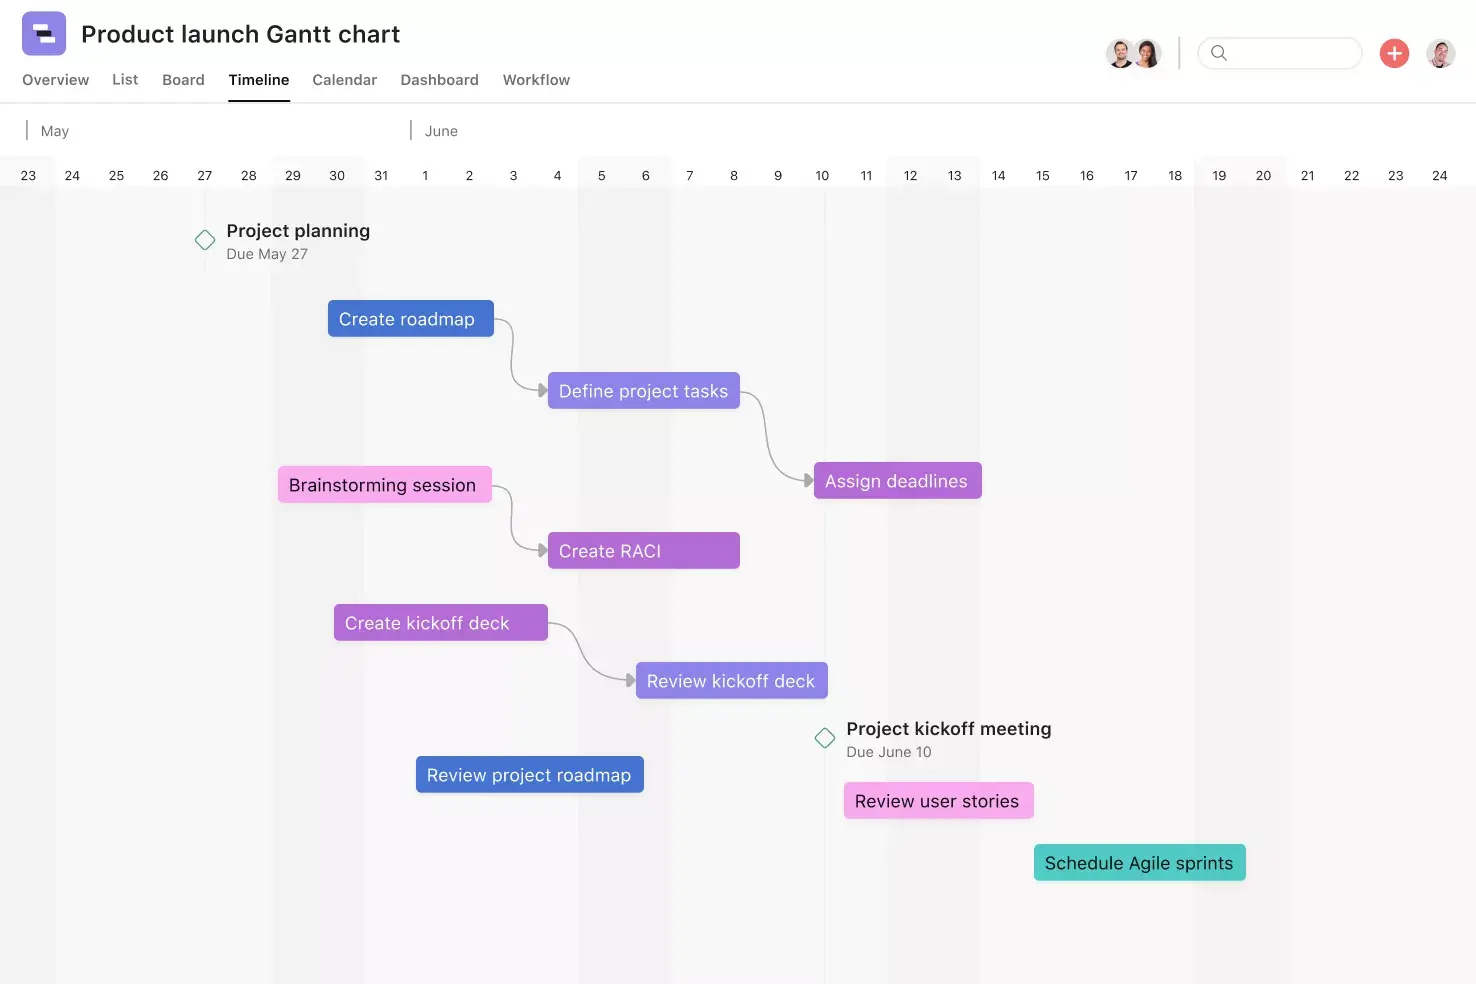 [Product ui] Product launch Gantt chart project in Asana (Timeline)